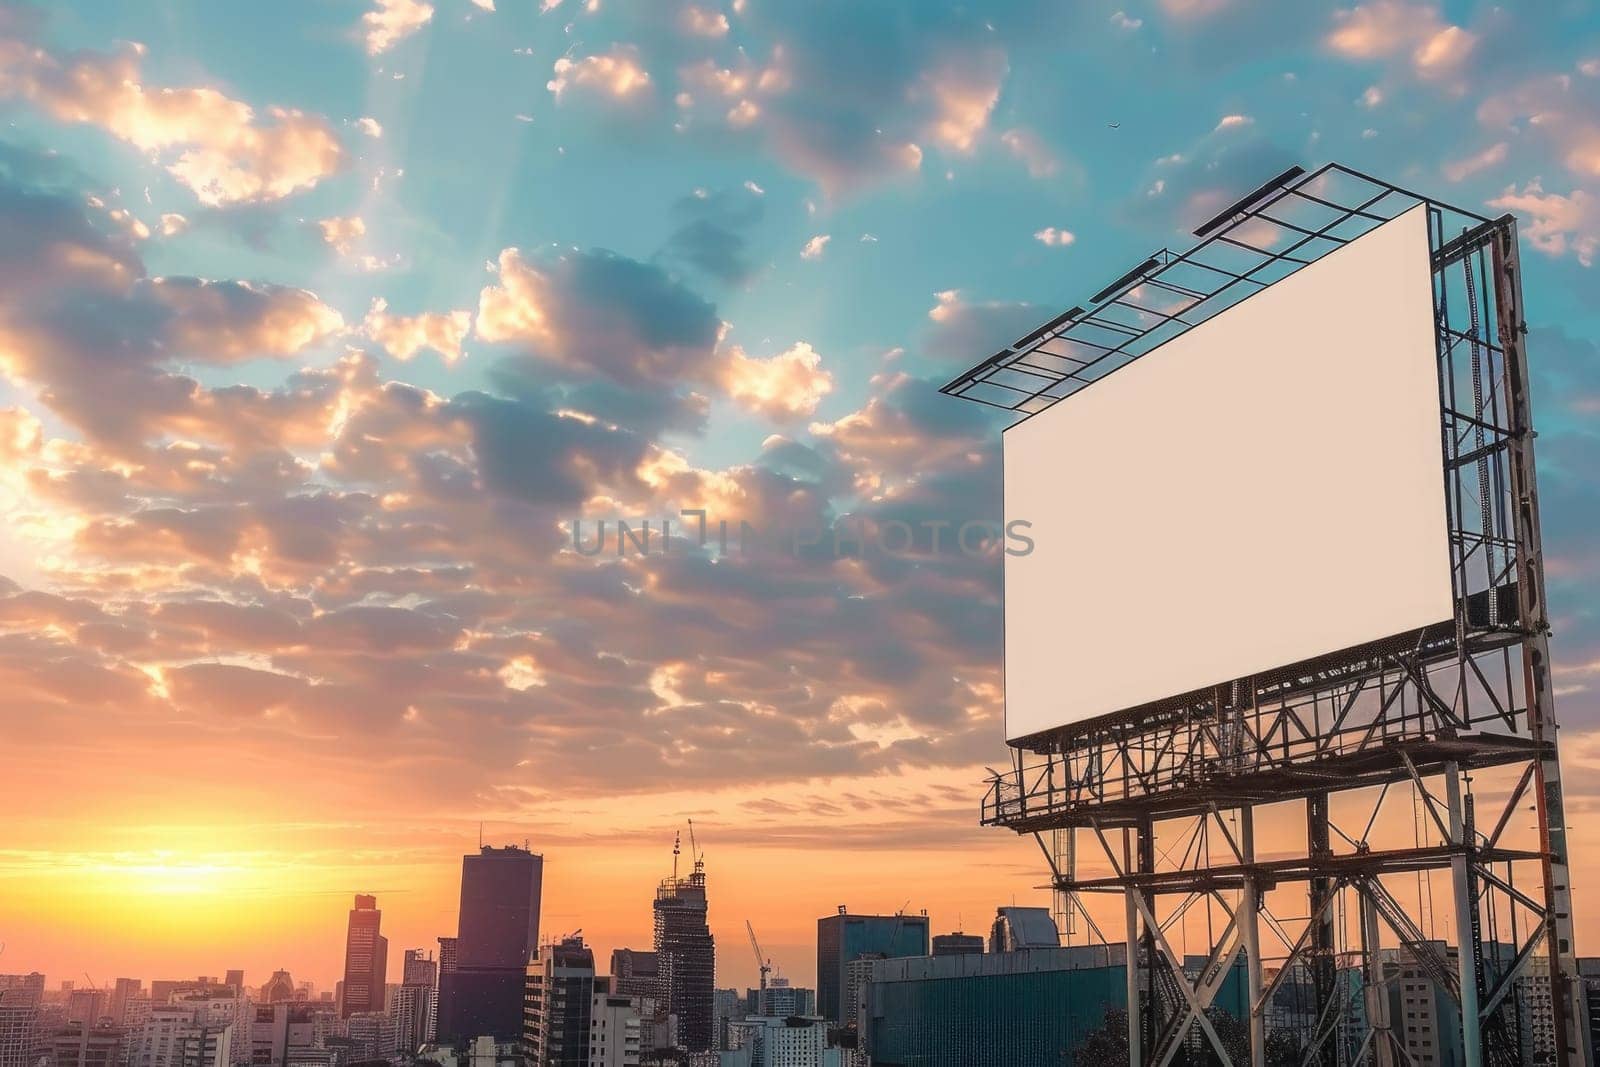 A large, pristine white billboard mounted on a sleek modern skyscraper. The first rays of dawn illuminate the city skyline behind it